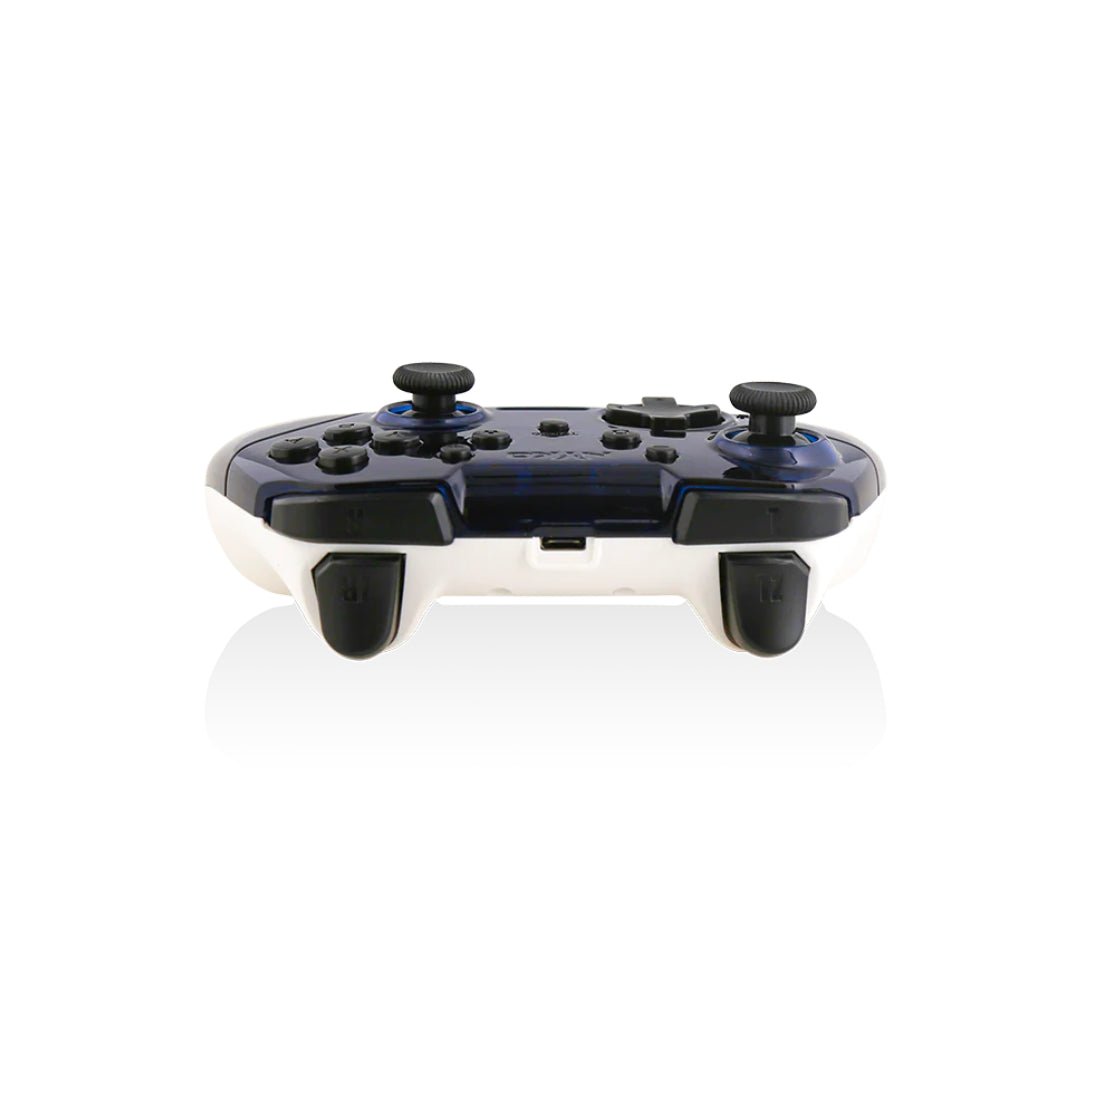 Nyko Wireless Core Controller for Nintendo Switch - Blue/White - Store 974 | ستور ٩٧٤